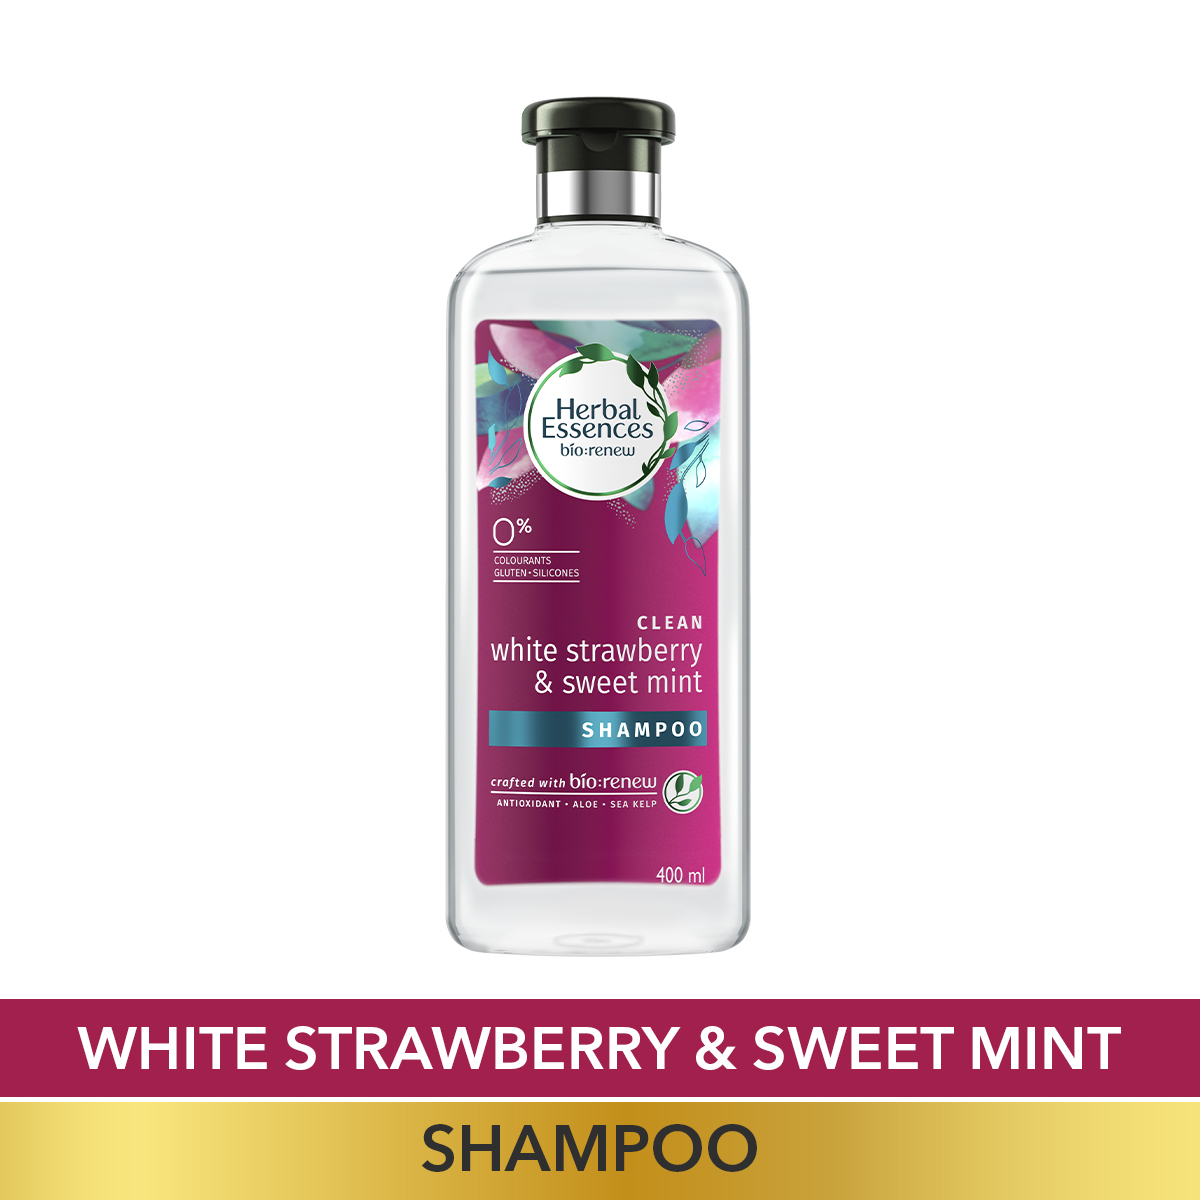 Herbal Essences White Strawberry & Sweet Mint SHAMPOO- For Cleansing and Volume - No Paraben, No Colorants, 400 ML